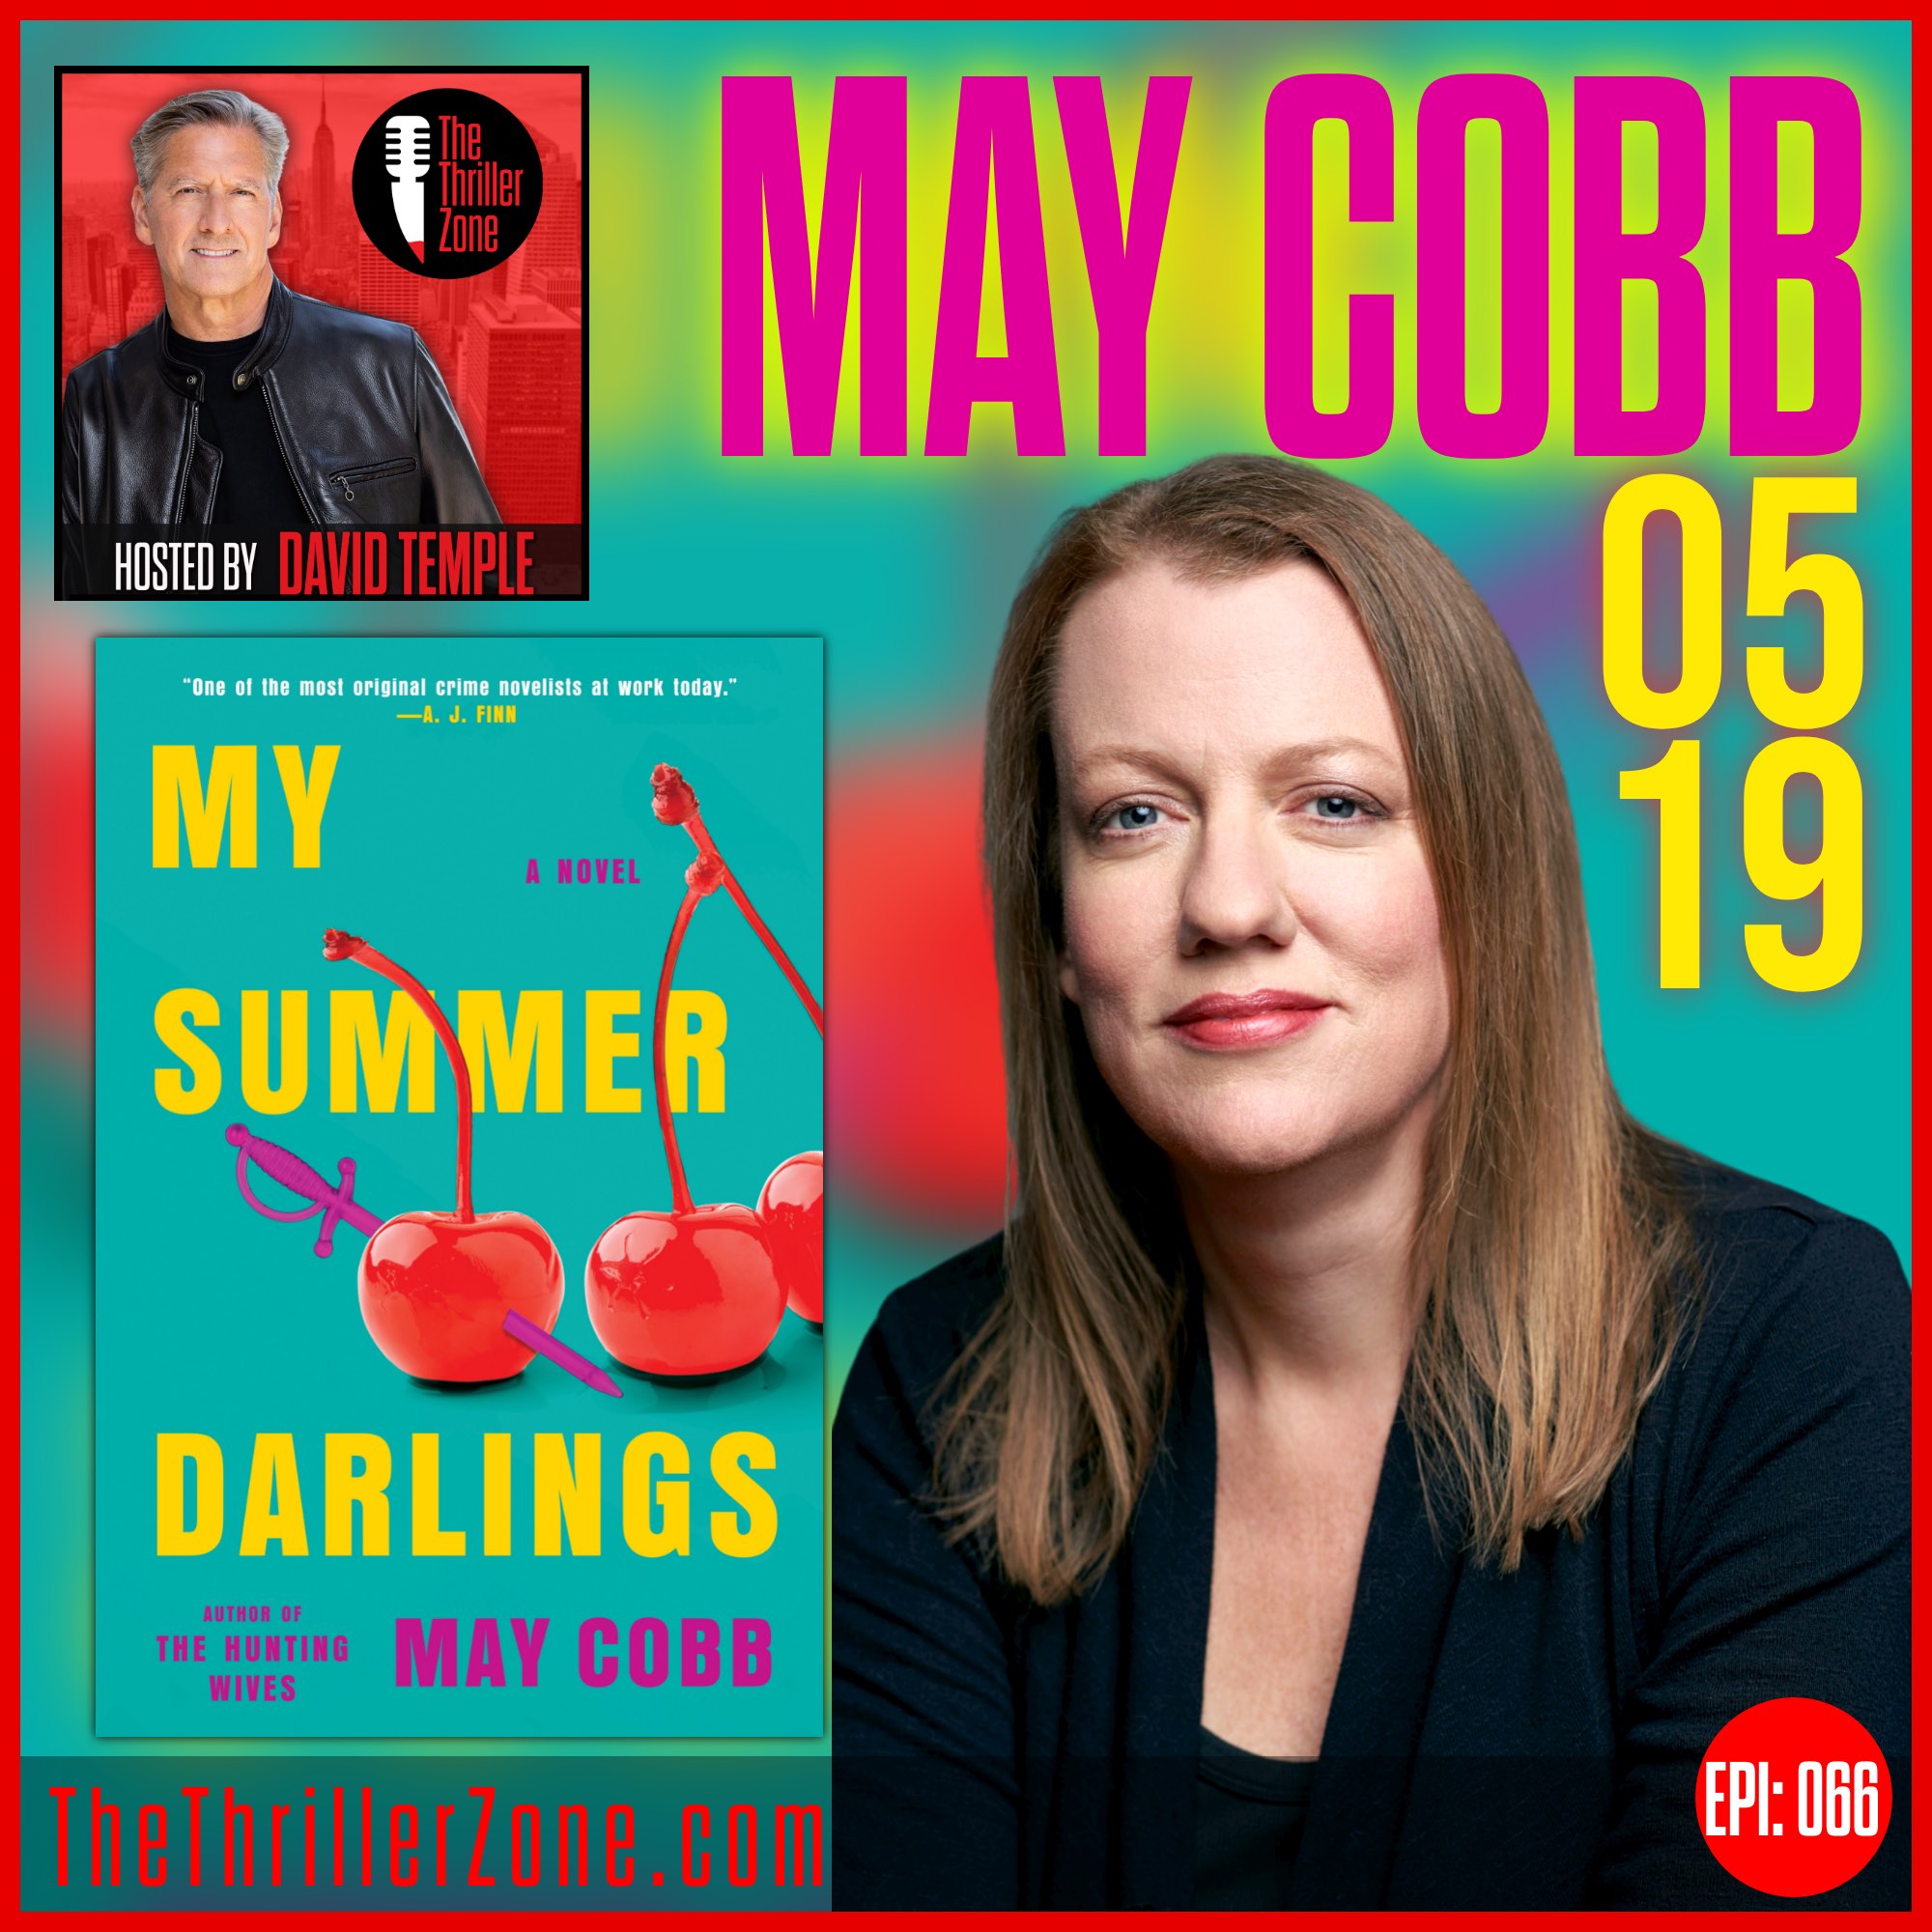 May Cobb, author of My Summer Darlings